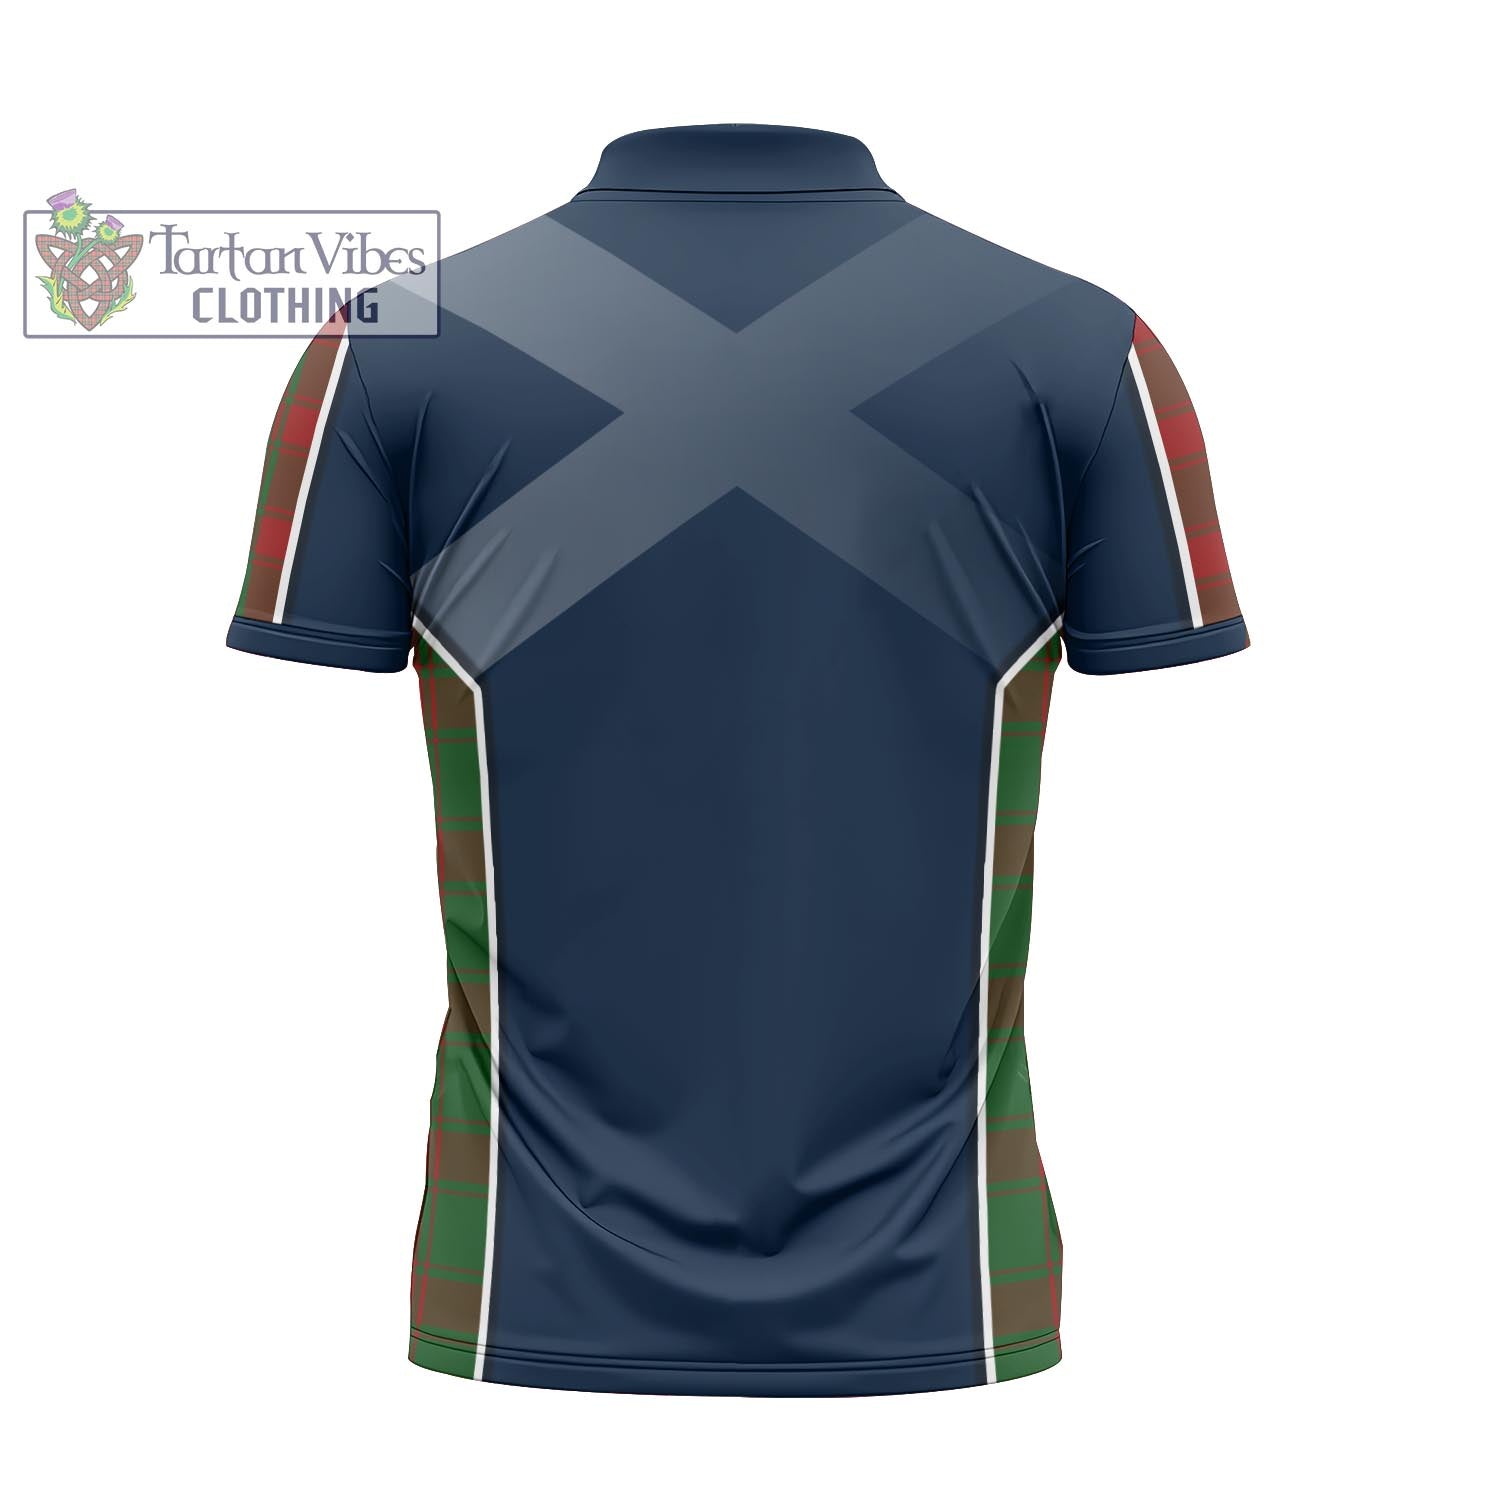 Tartan Vibes Clothing Middleton Tartan Zipper Polo Shirt with Family Crest and Scottish Thistle Vibes Sport Style